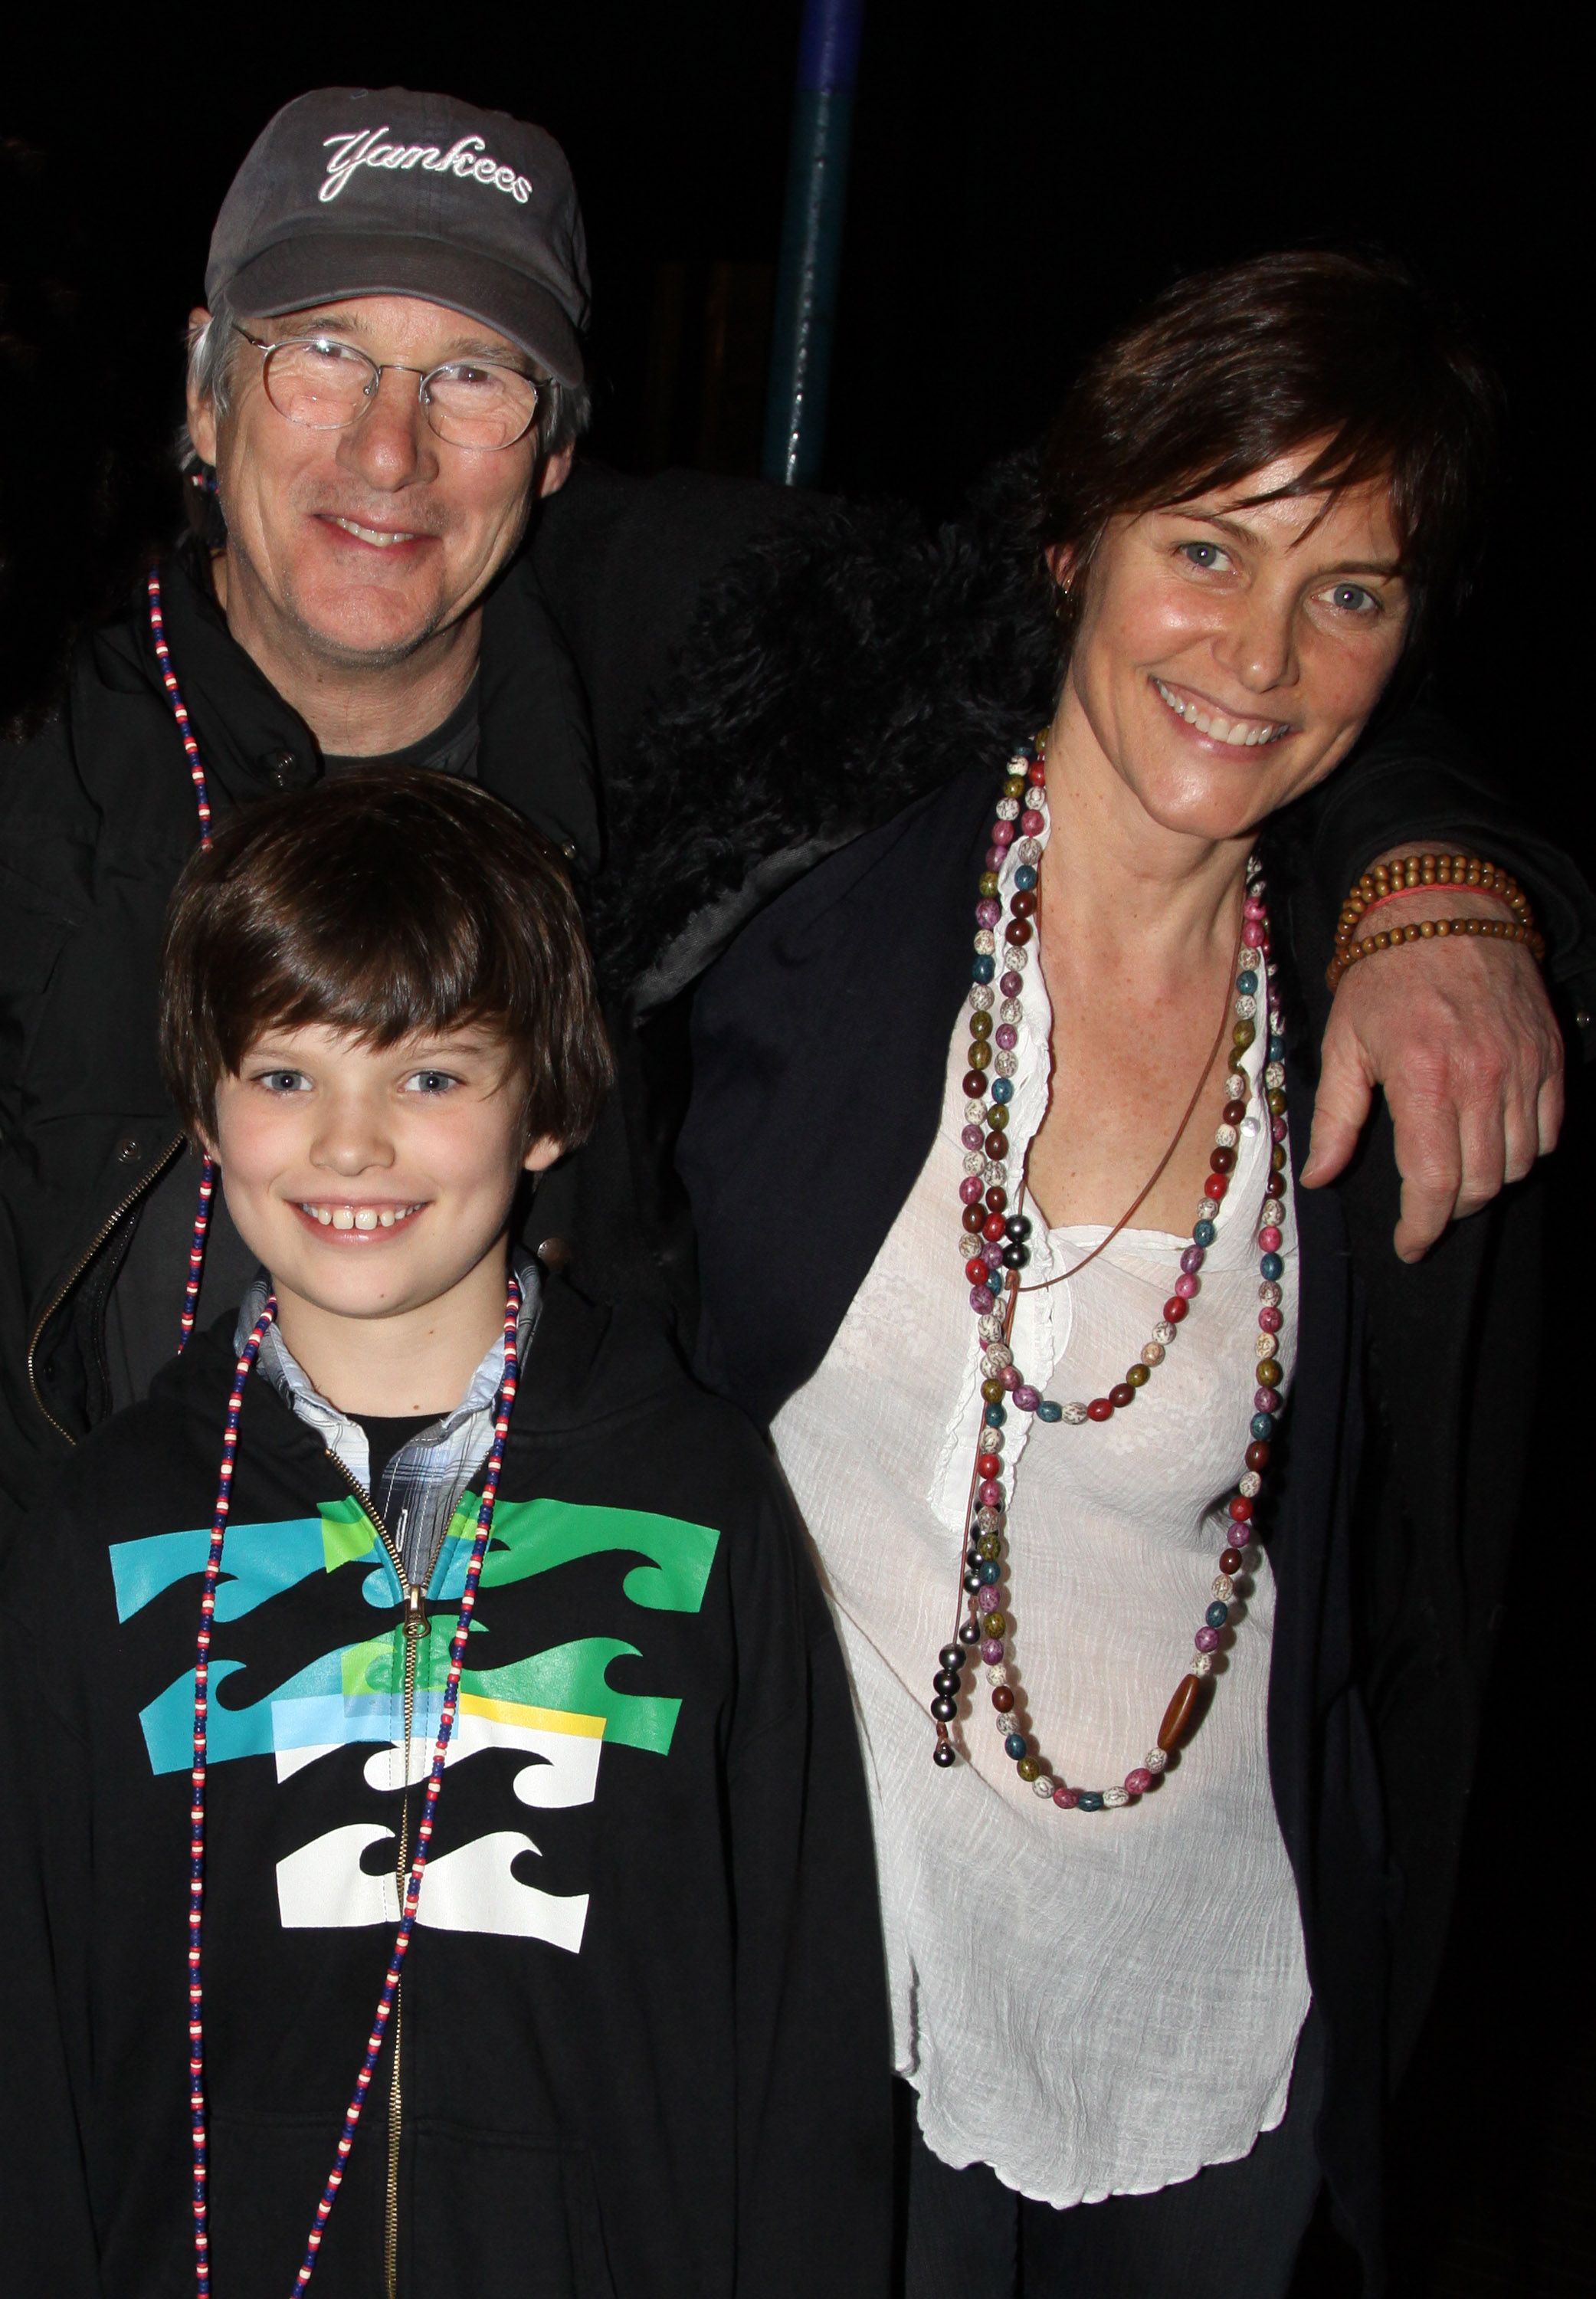  Richard Gere, Cary Lowell and son Homer Gere pose backstage at the hit musical "Hair" on Broadway at The Al Hirshfeld Theater on March 14, 2010 in New York City | Source: Getty Images 